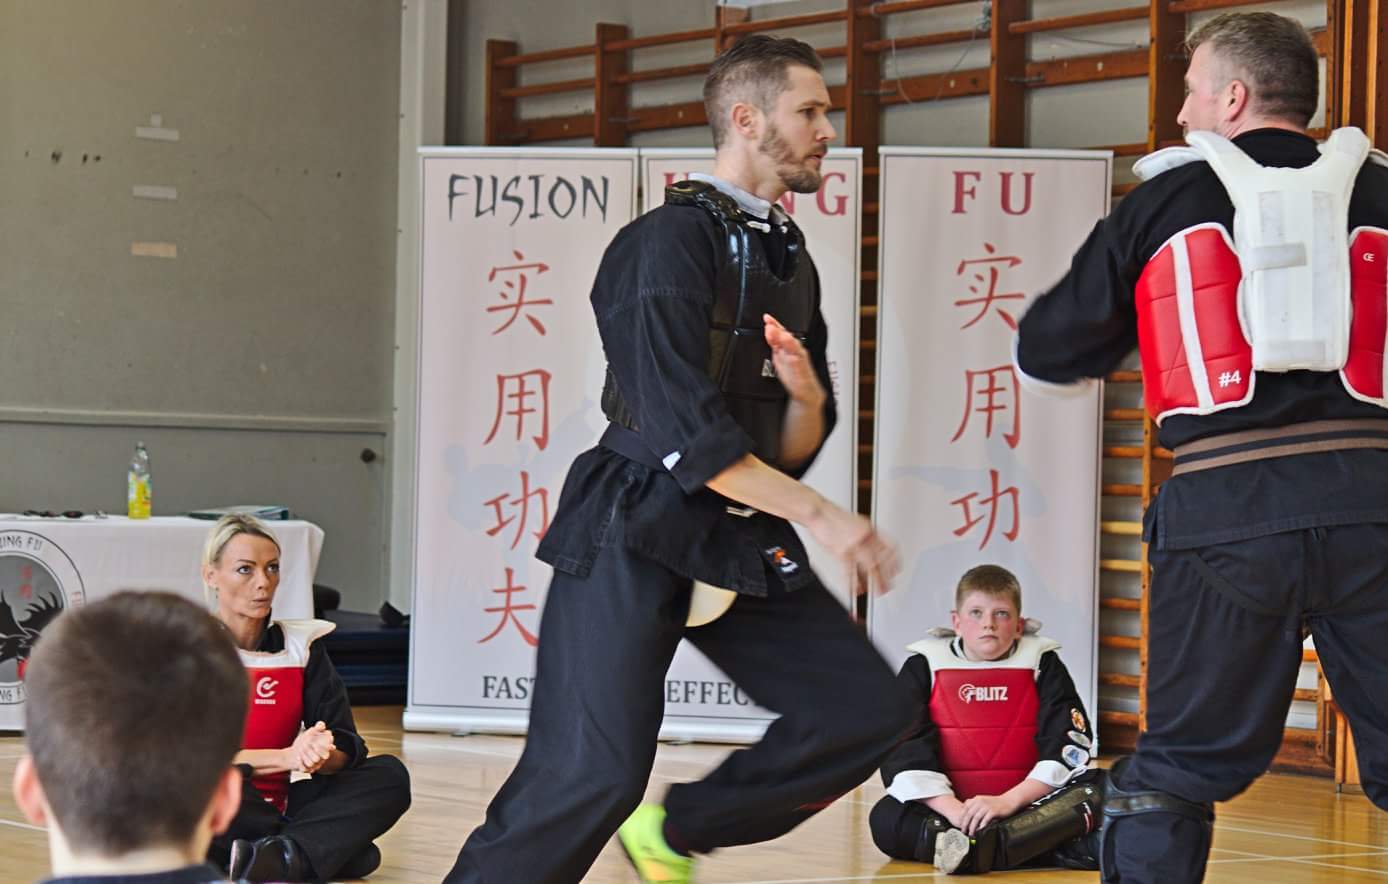 sparring at Grading at Fusion Kung Fu in Norwich